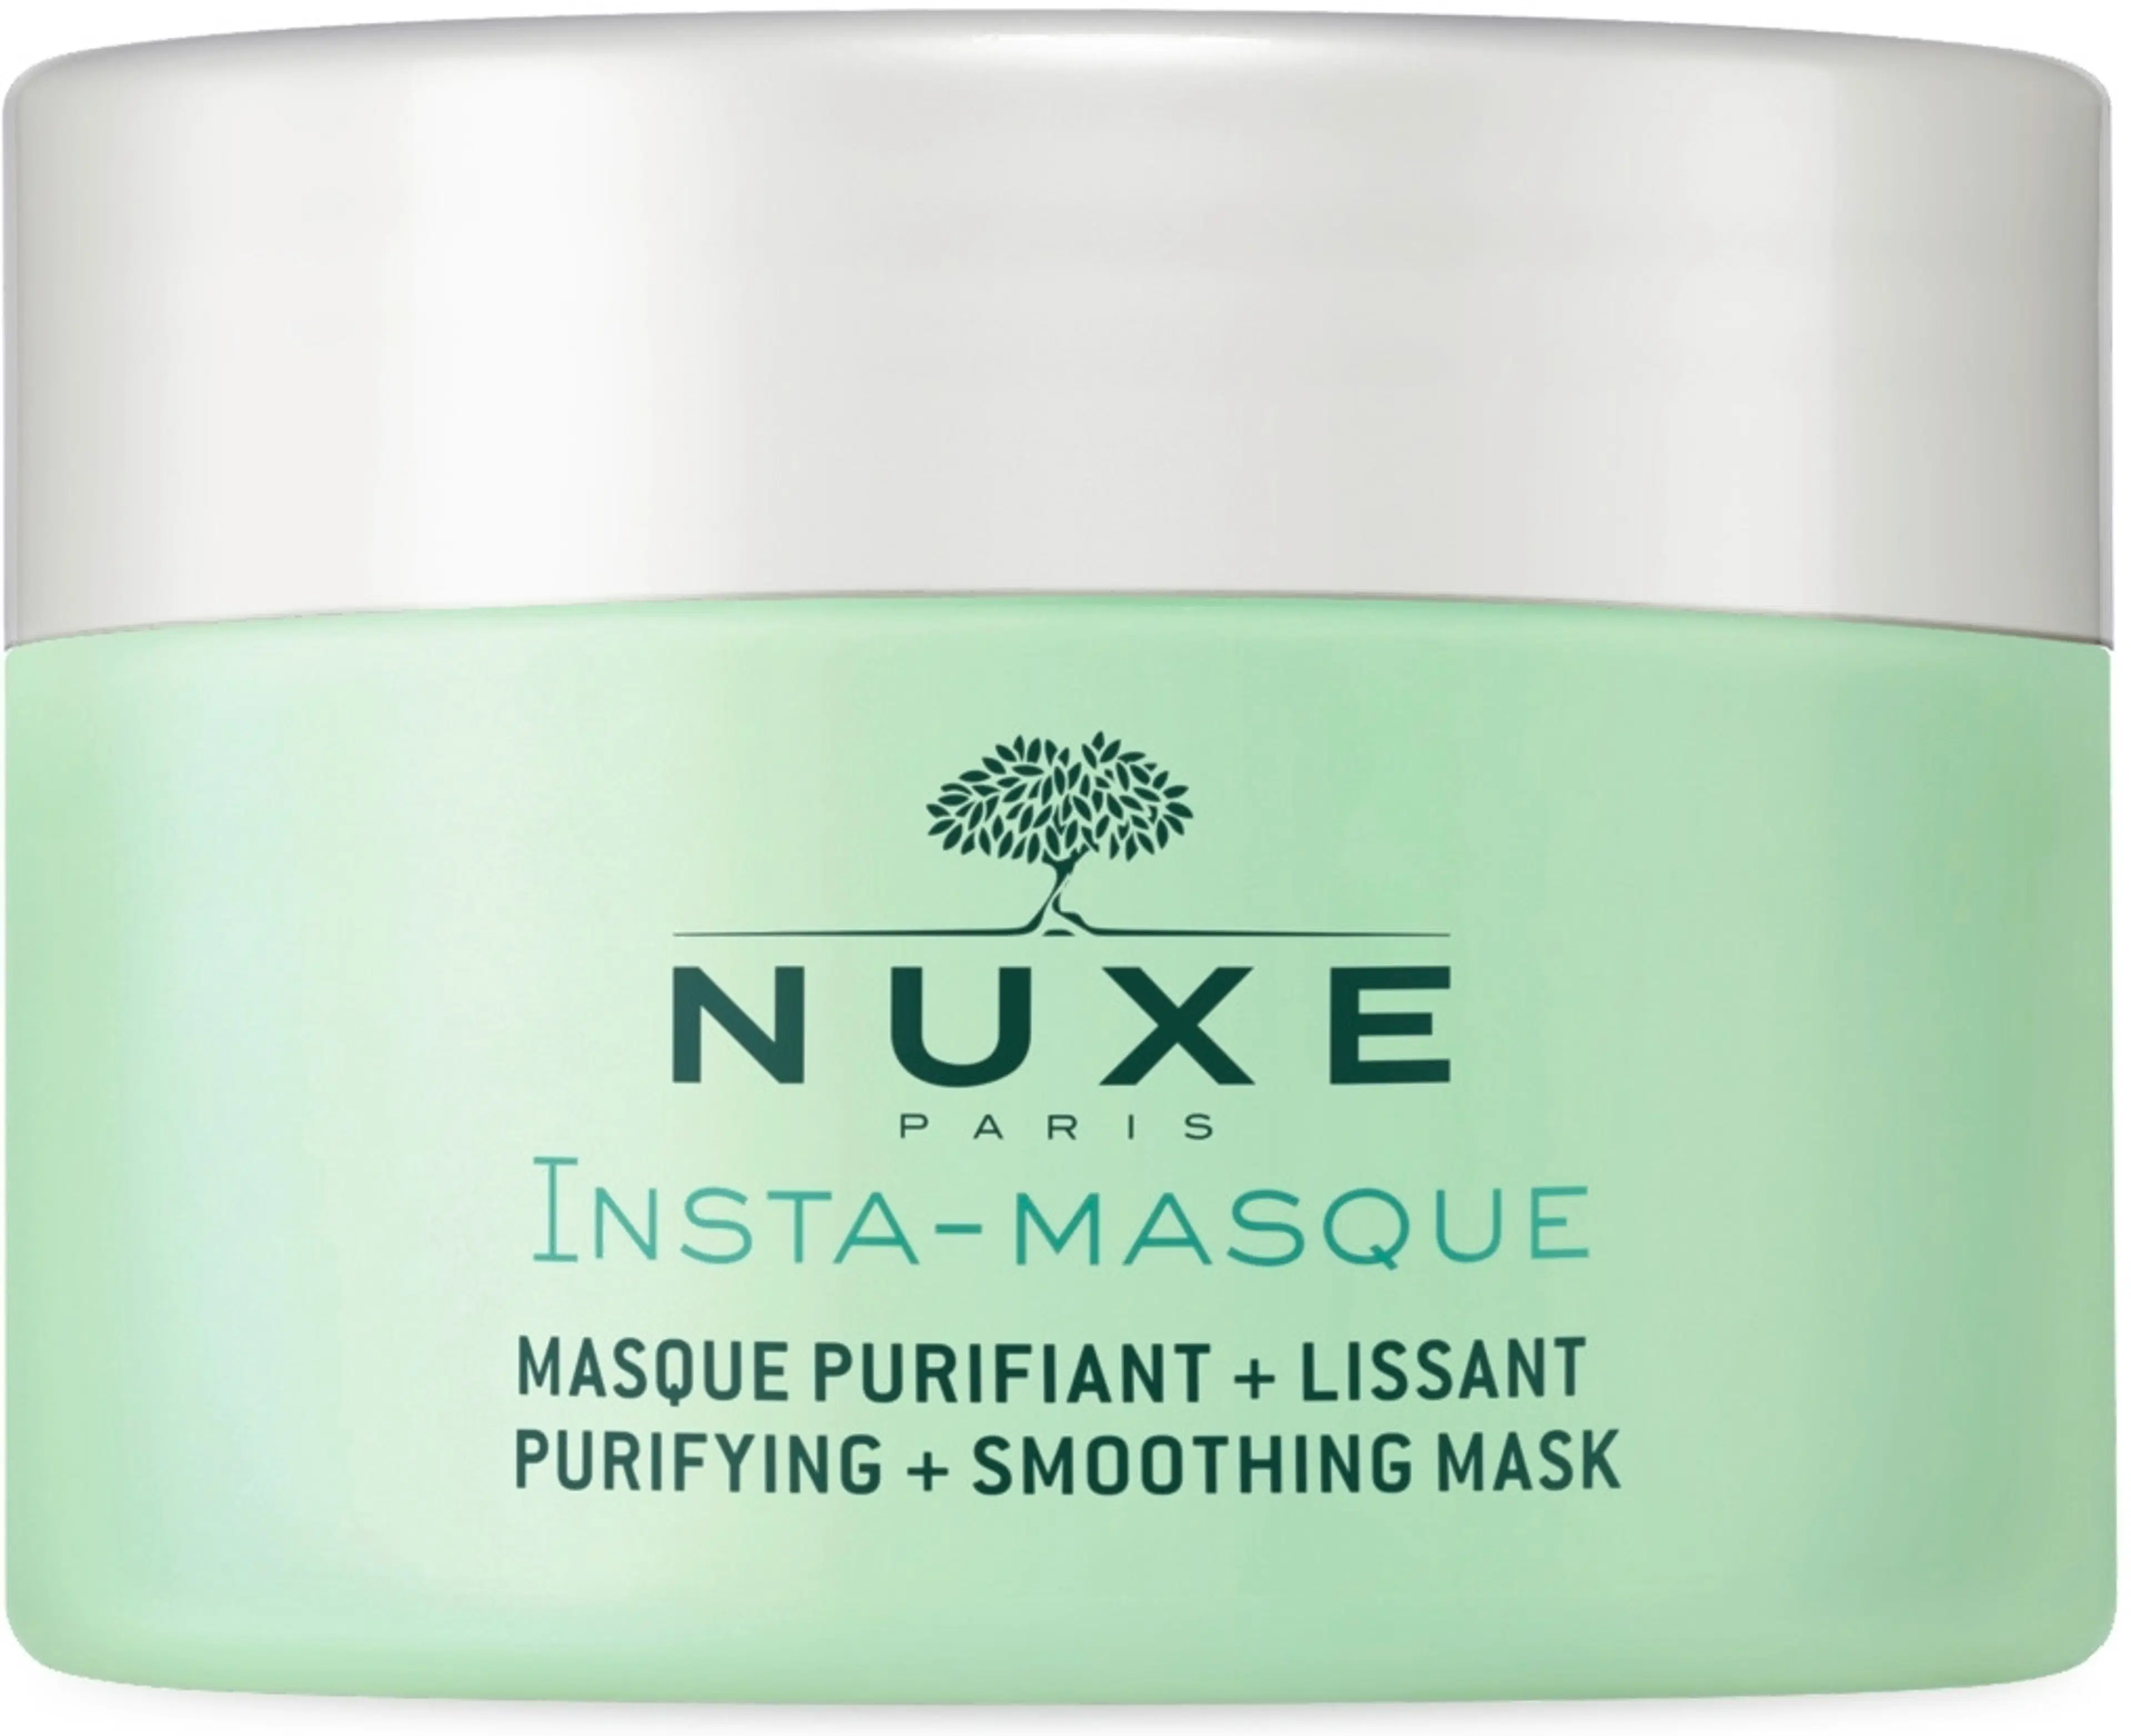 NUXE Insta Masque Purifying + Smoothing Mask naamio 50 ml